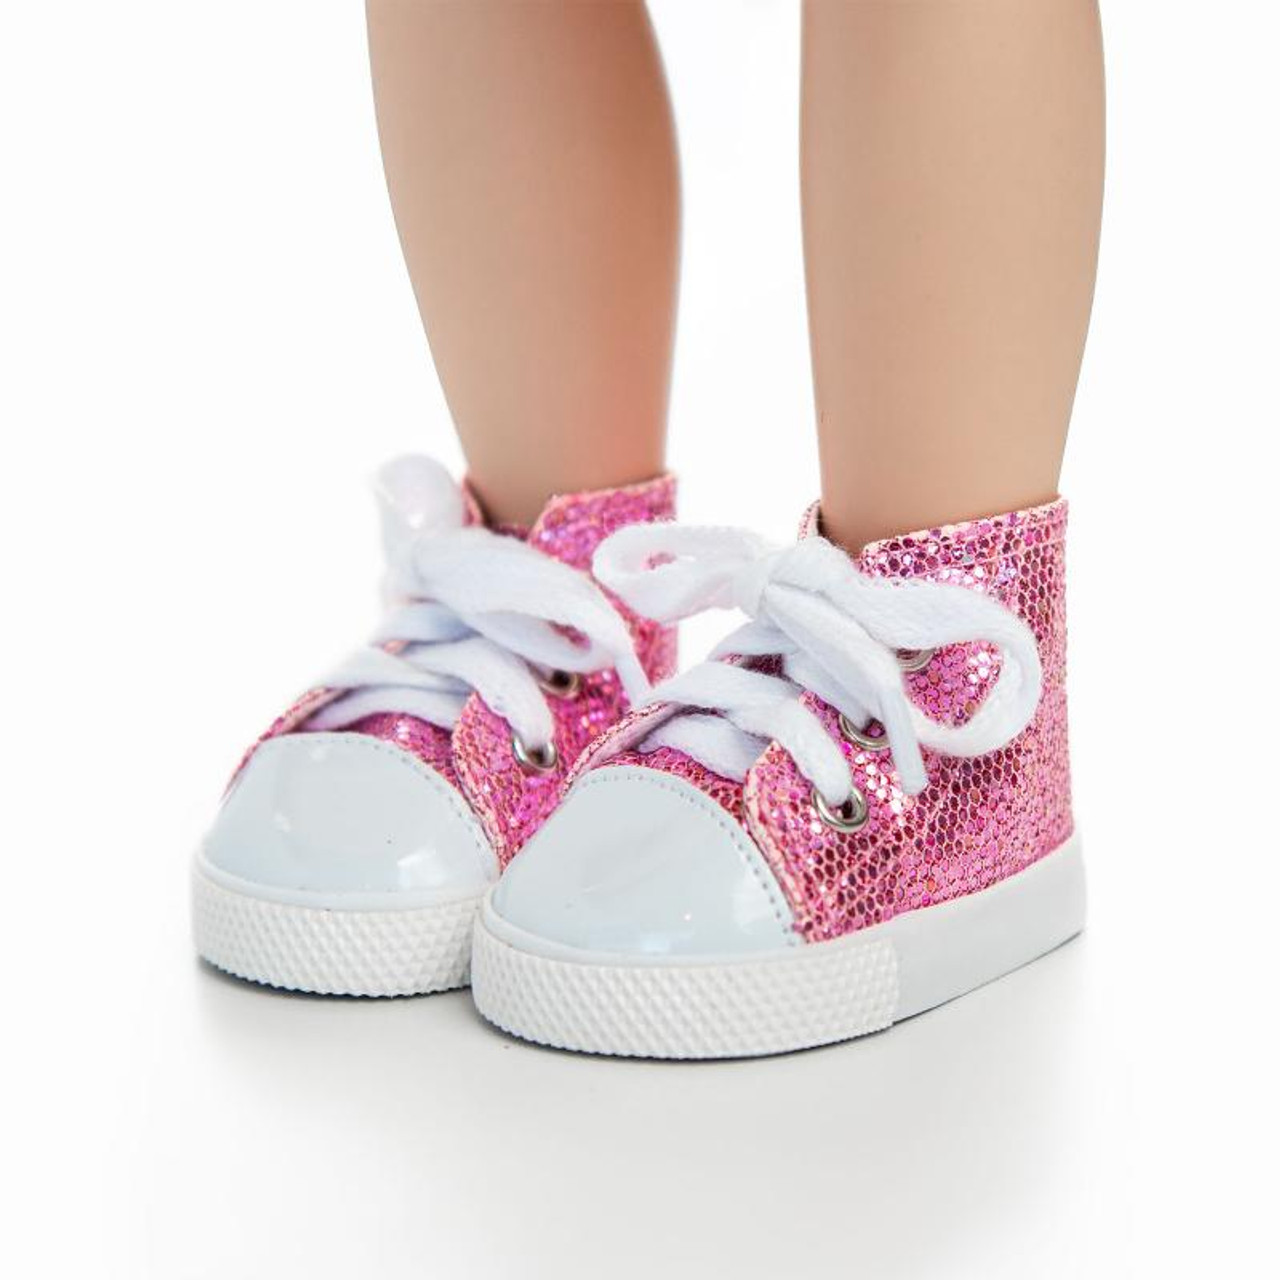 Pink Sparkly Sneakers 18 inch American Girl /Baby Doll Shoes